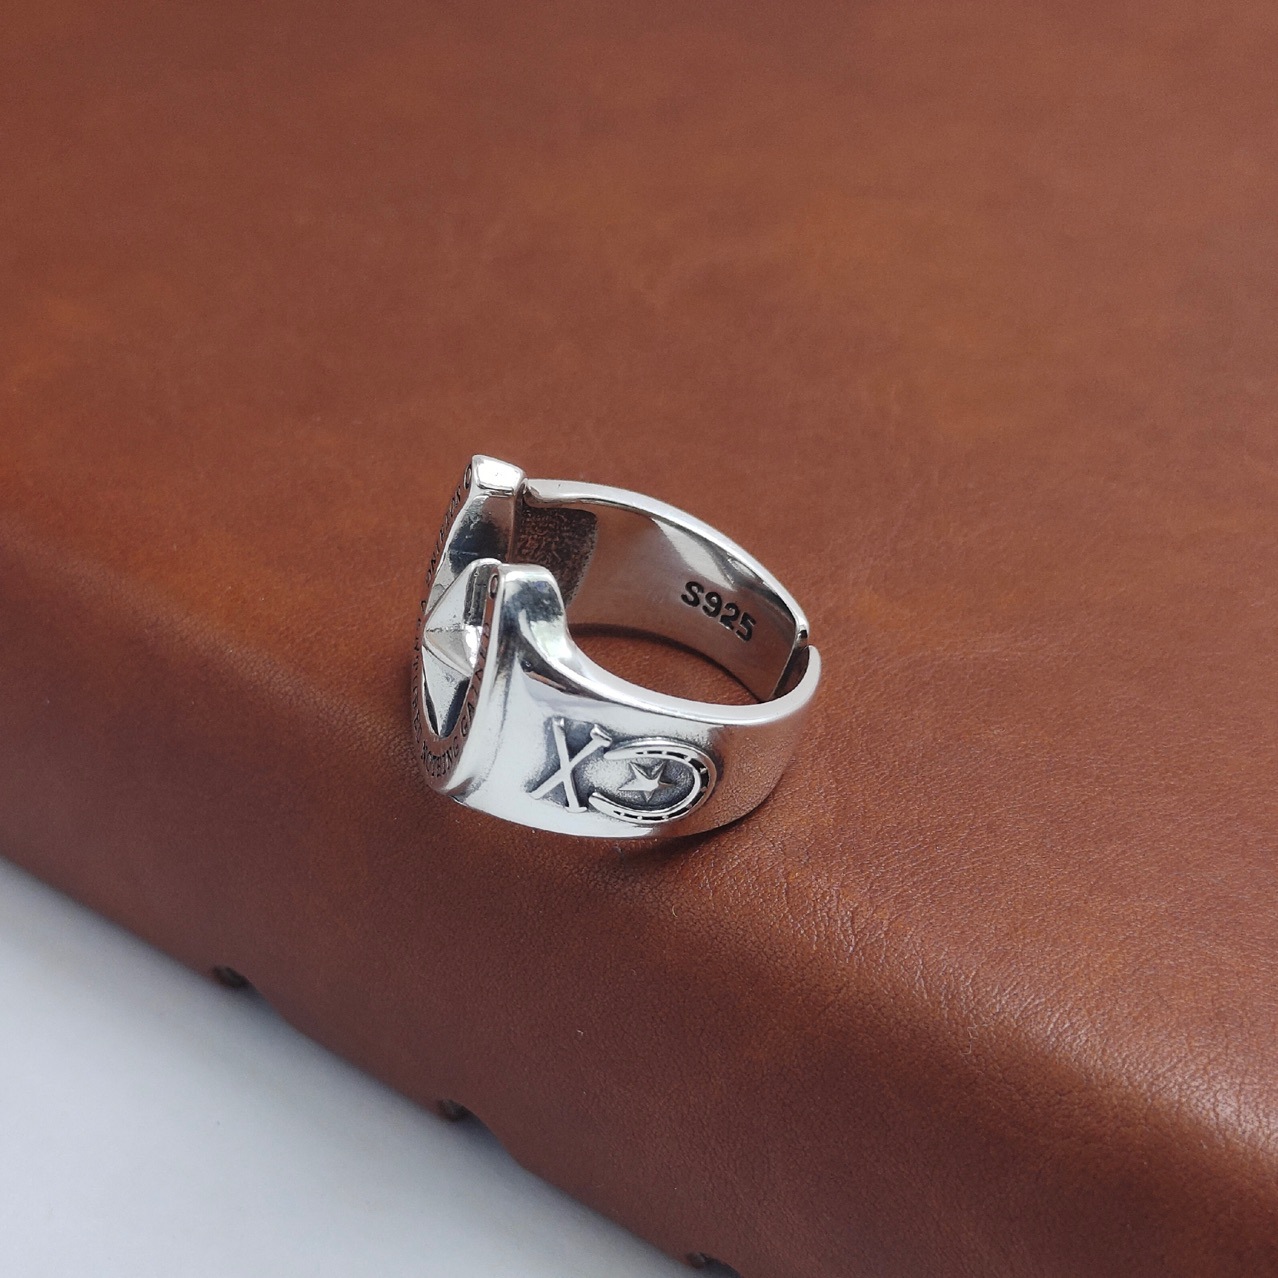 Close-Up of the Star Symbol on the Men's Silver Ring